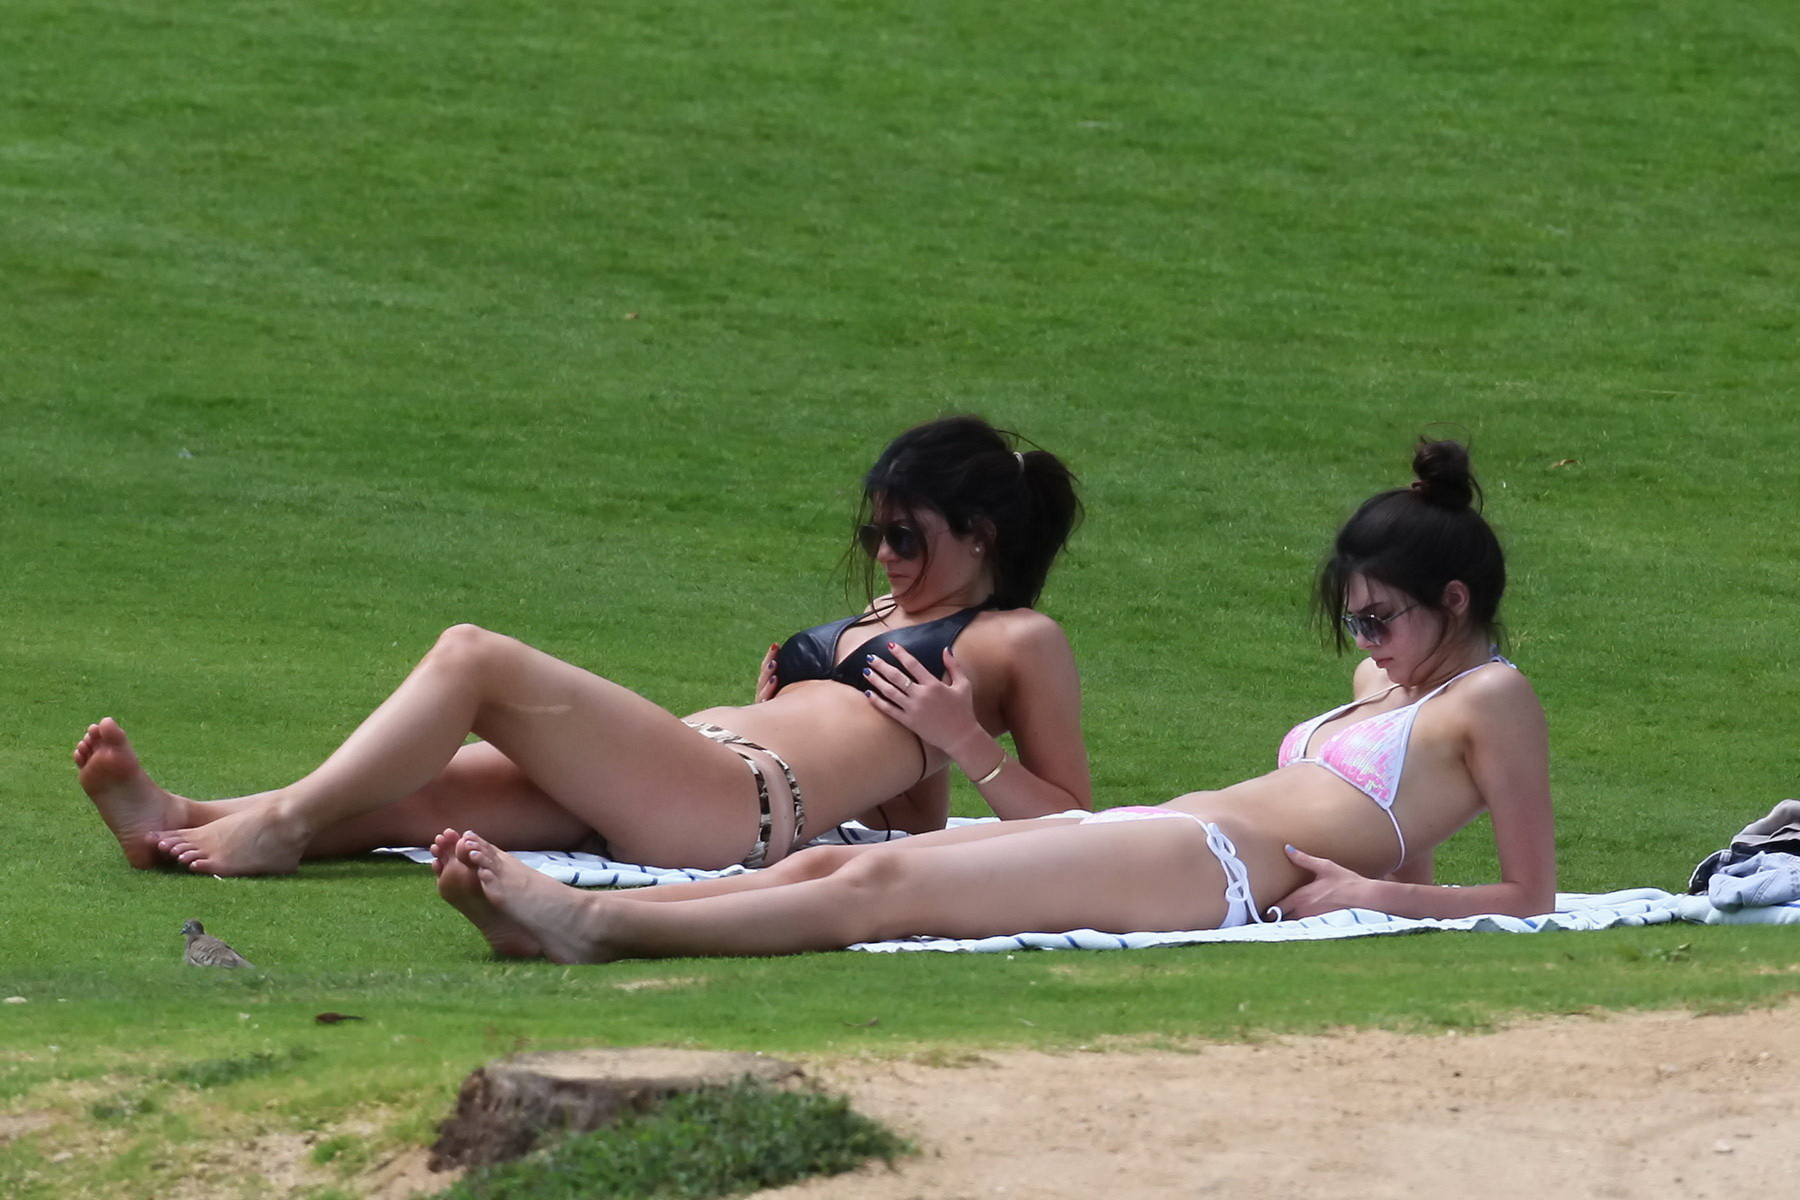 Kylie and Kendall Jenner tanning their hot bodies in skimpy bikini sets on a mea #75174050